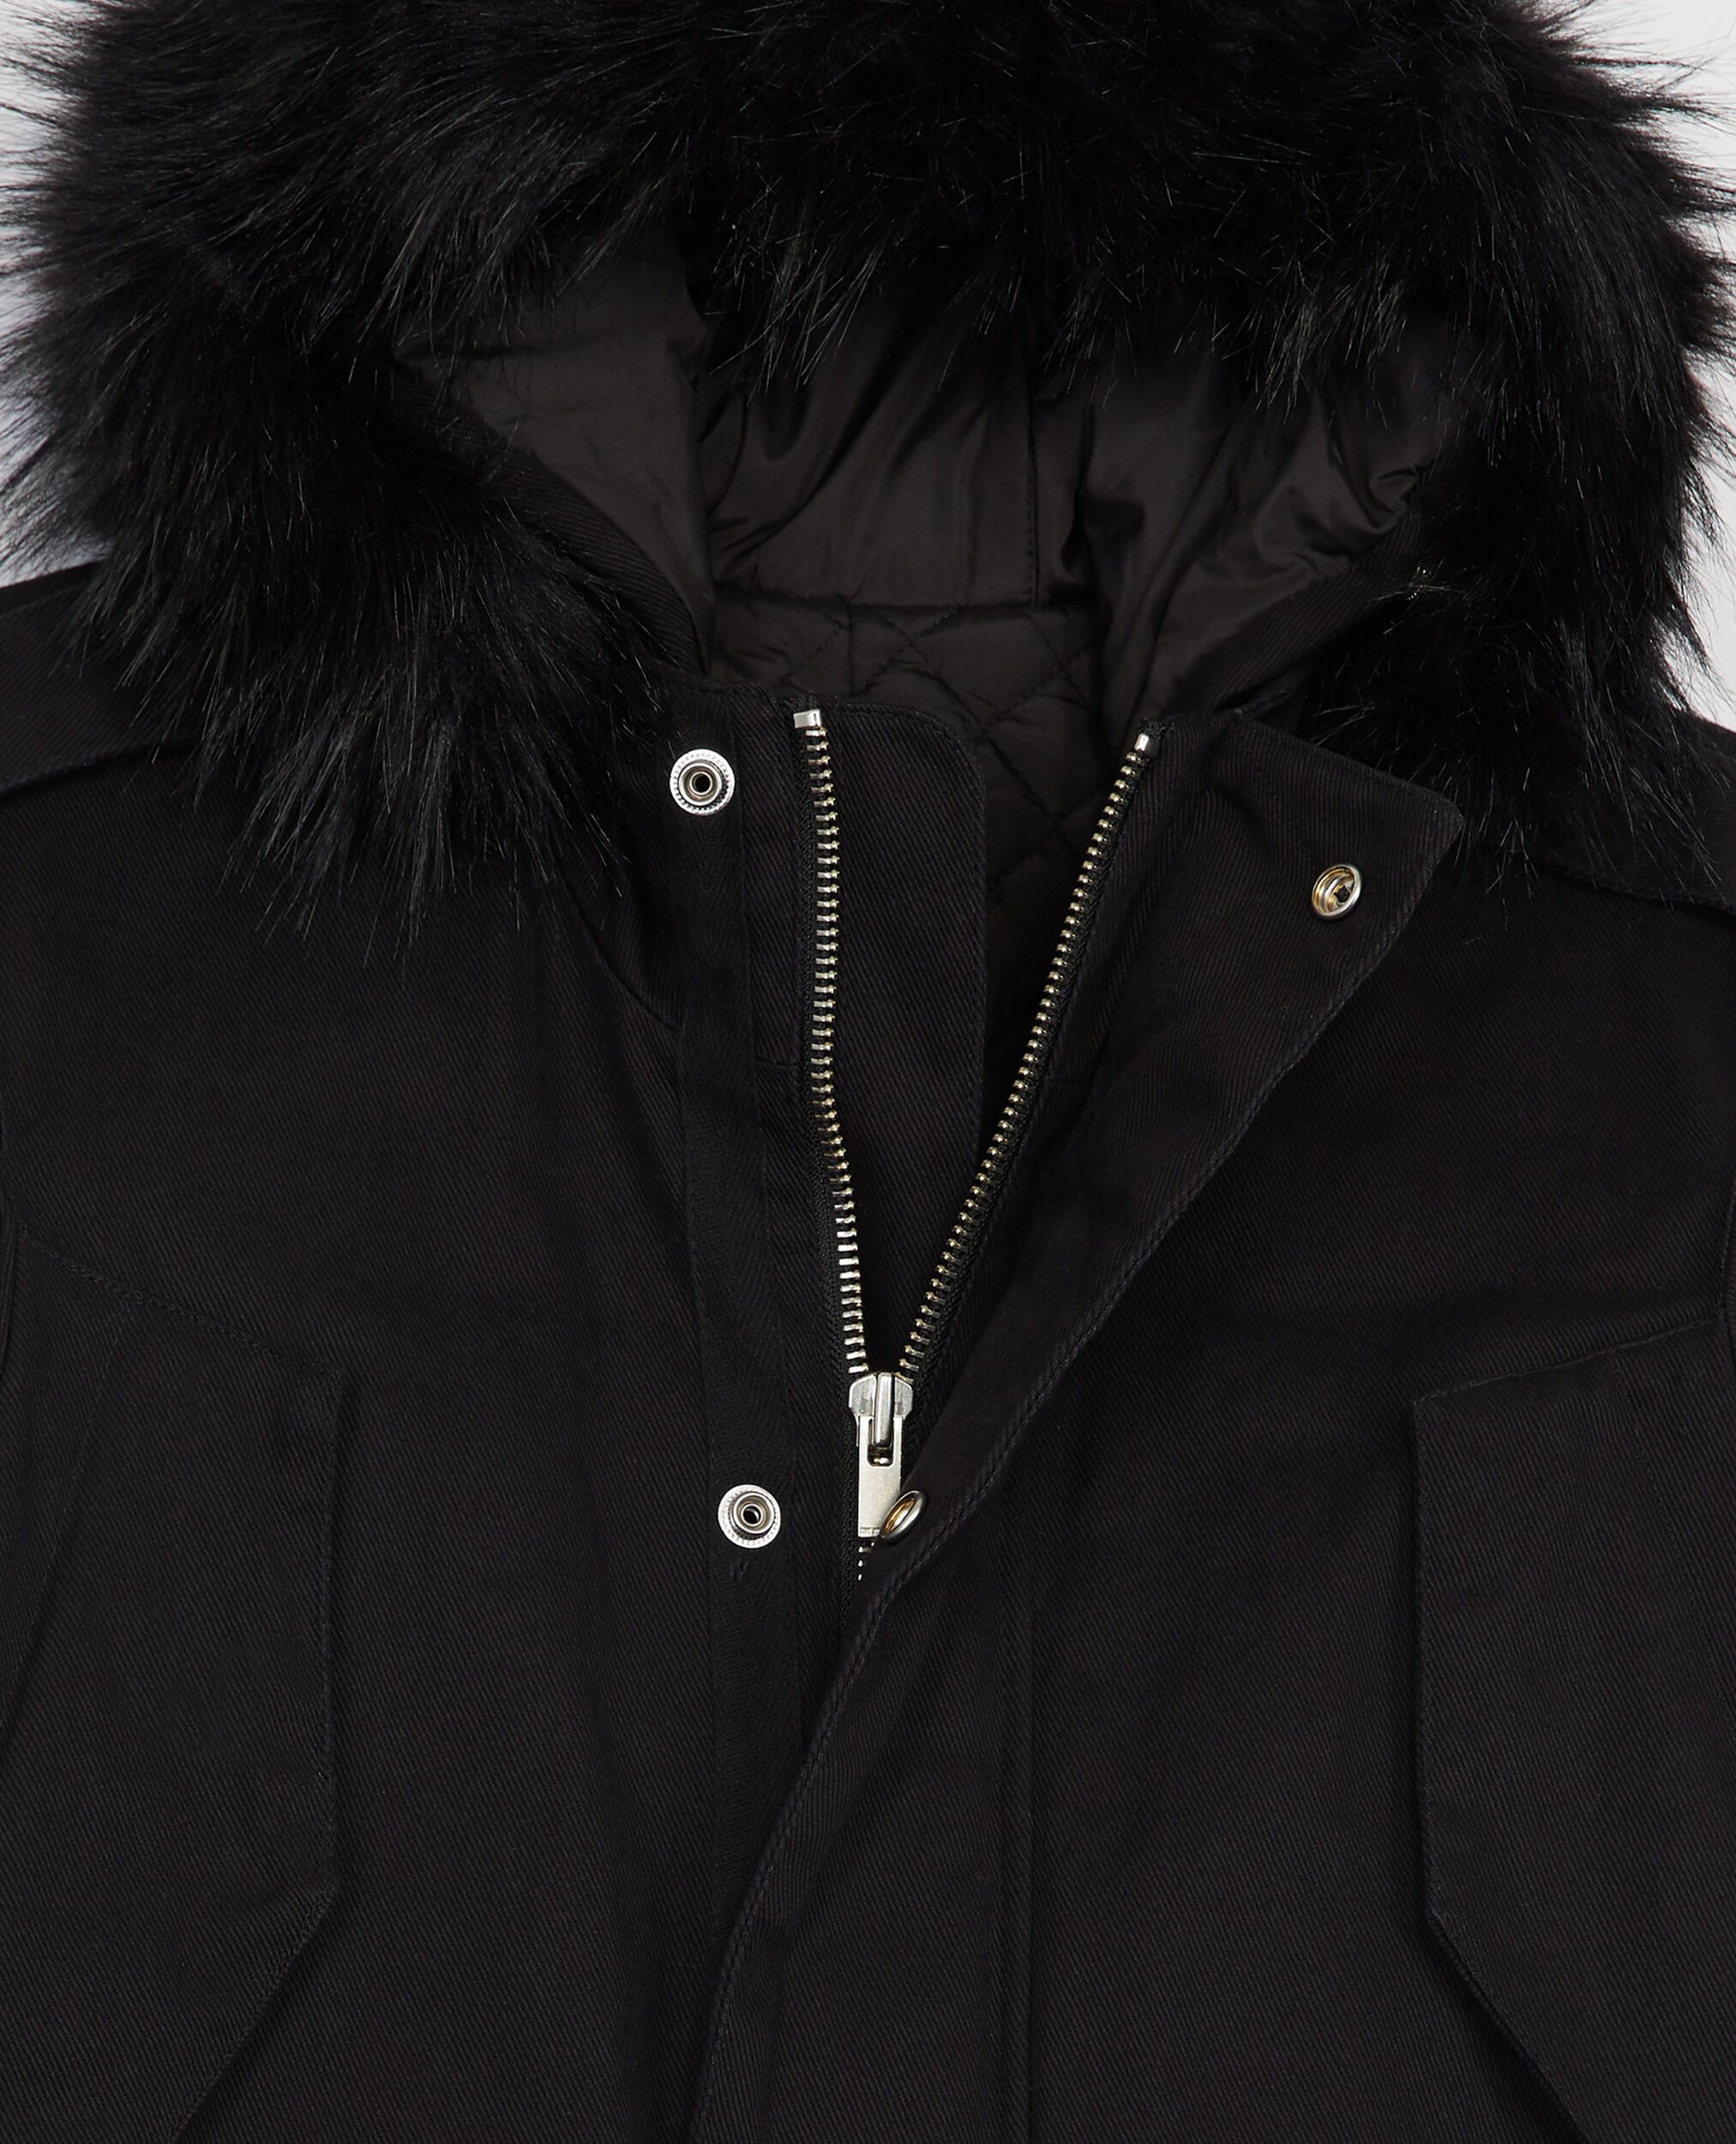 Cotton twill parka with leather details